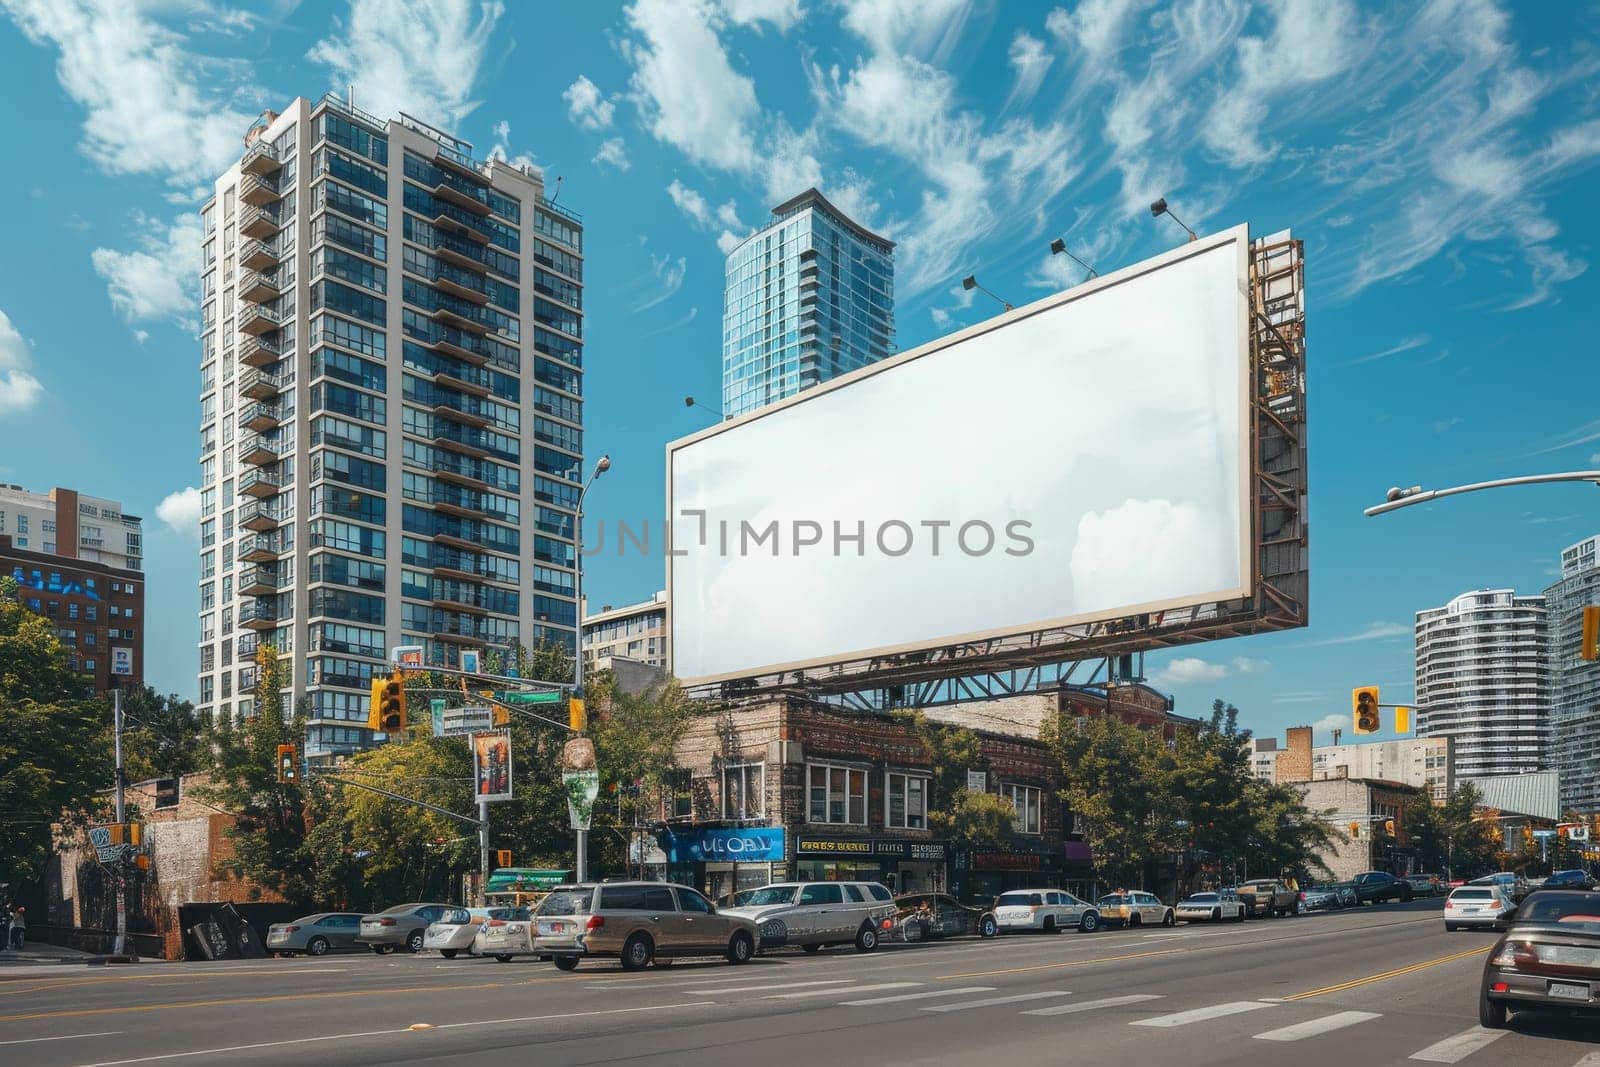 The billboard is white and is surrounded by tall buildings. The street is filled with cars and trucks. The scene is bustling and lively